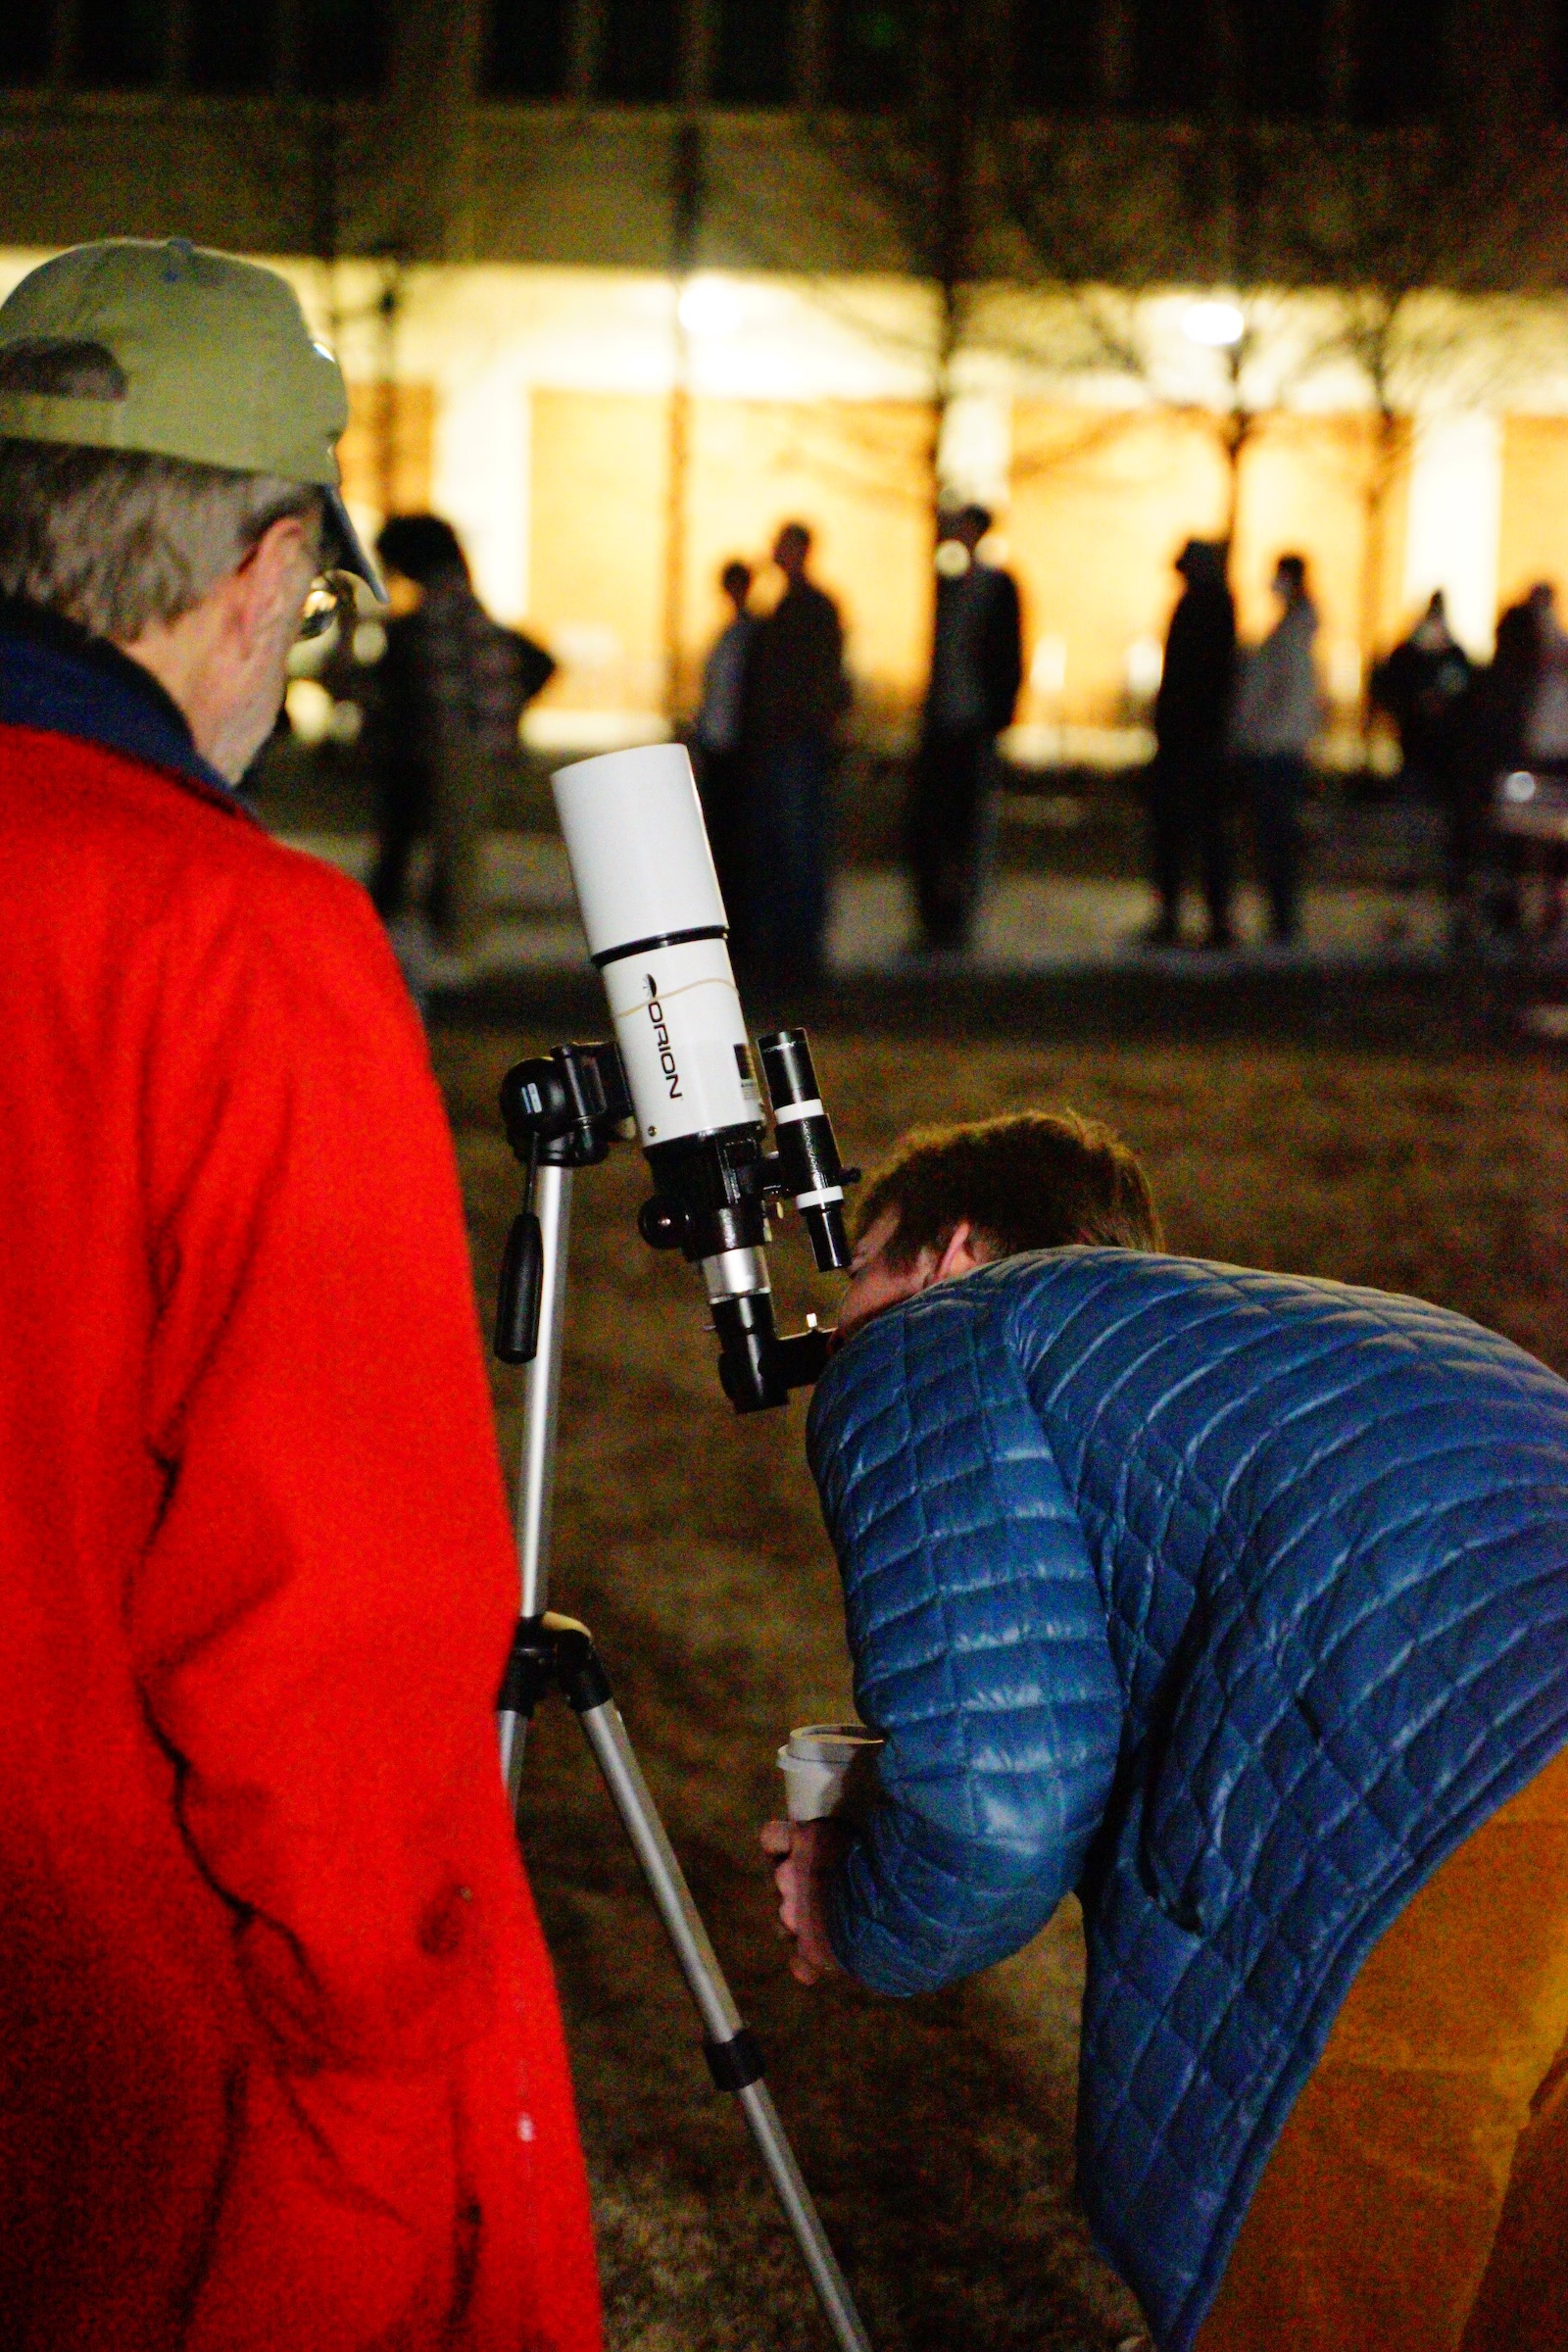 Public night at Tech Observatory